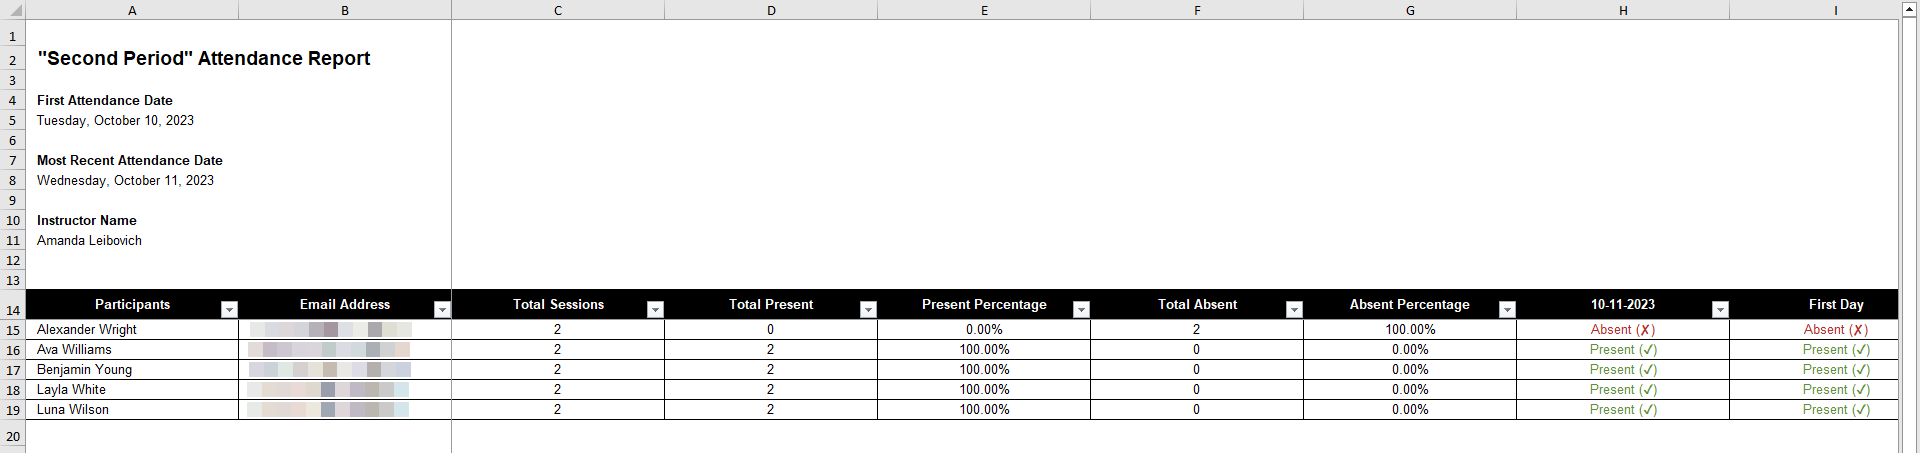 A course's downloaded Attandance Report open in Excel showing all fields as described